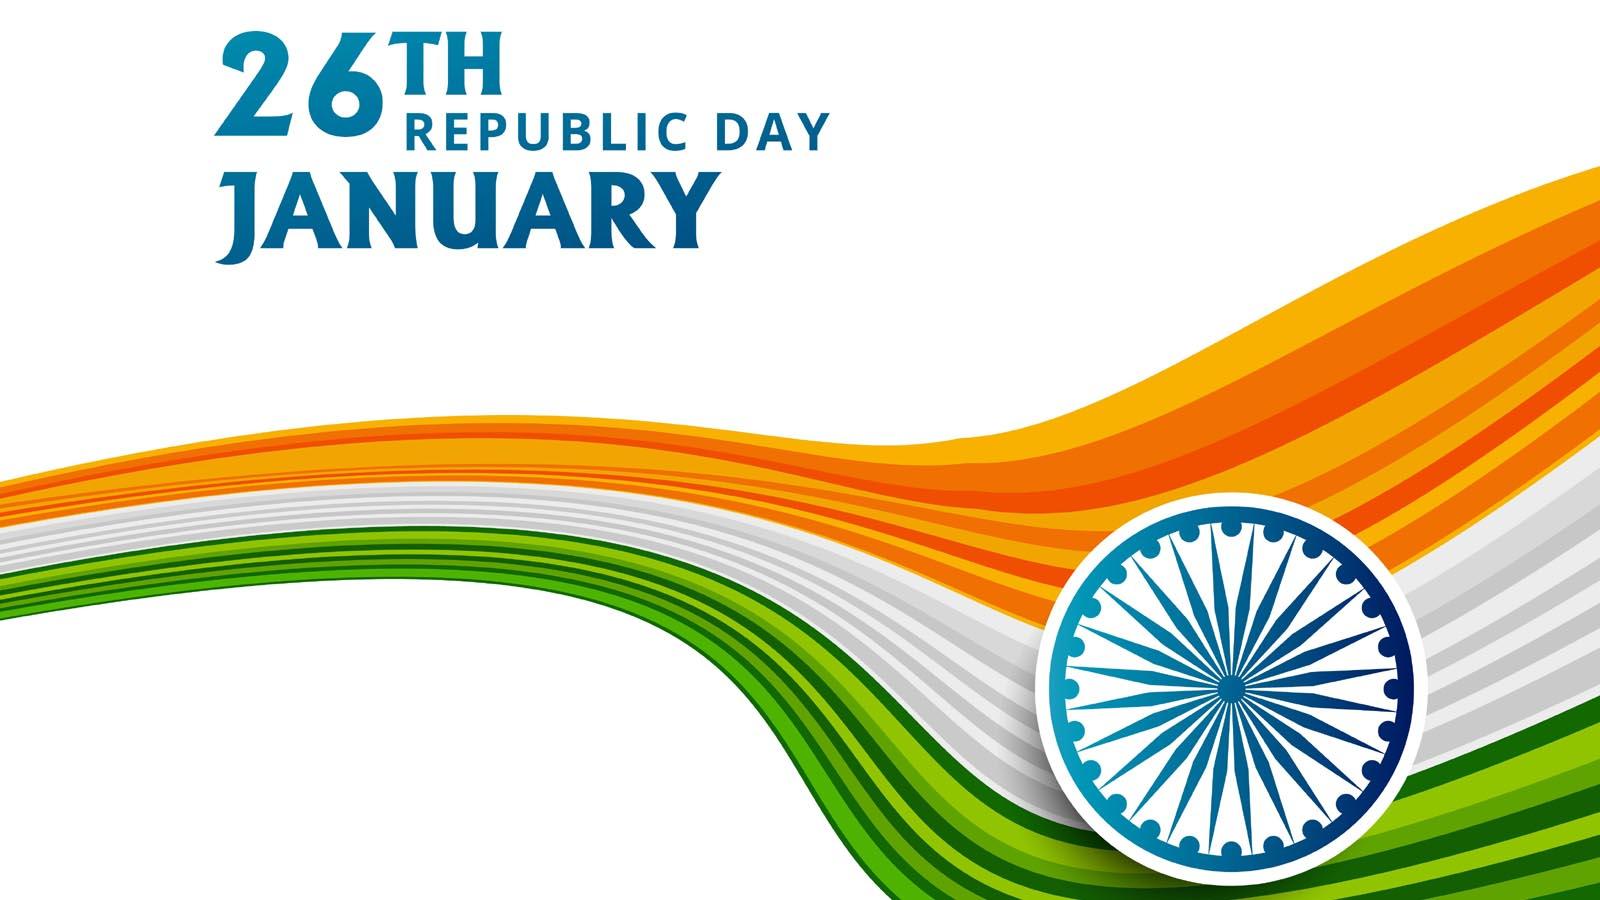 Happy Republic Day Wishes In Hindi 26th January Wishes